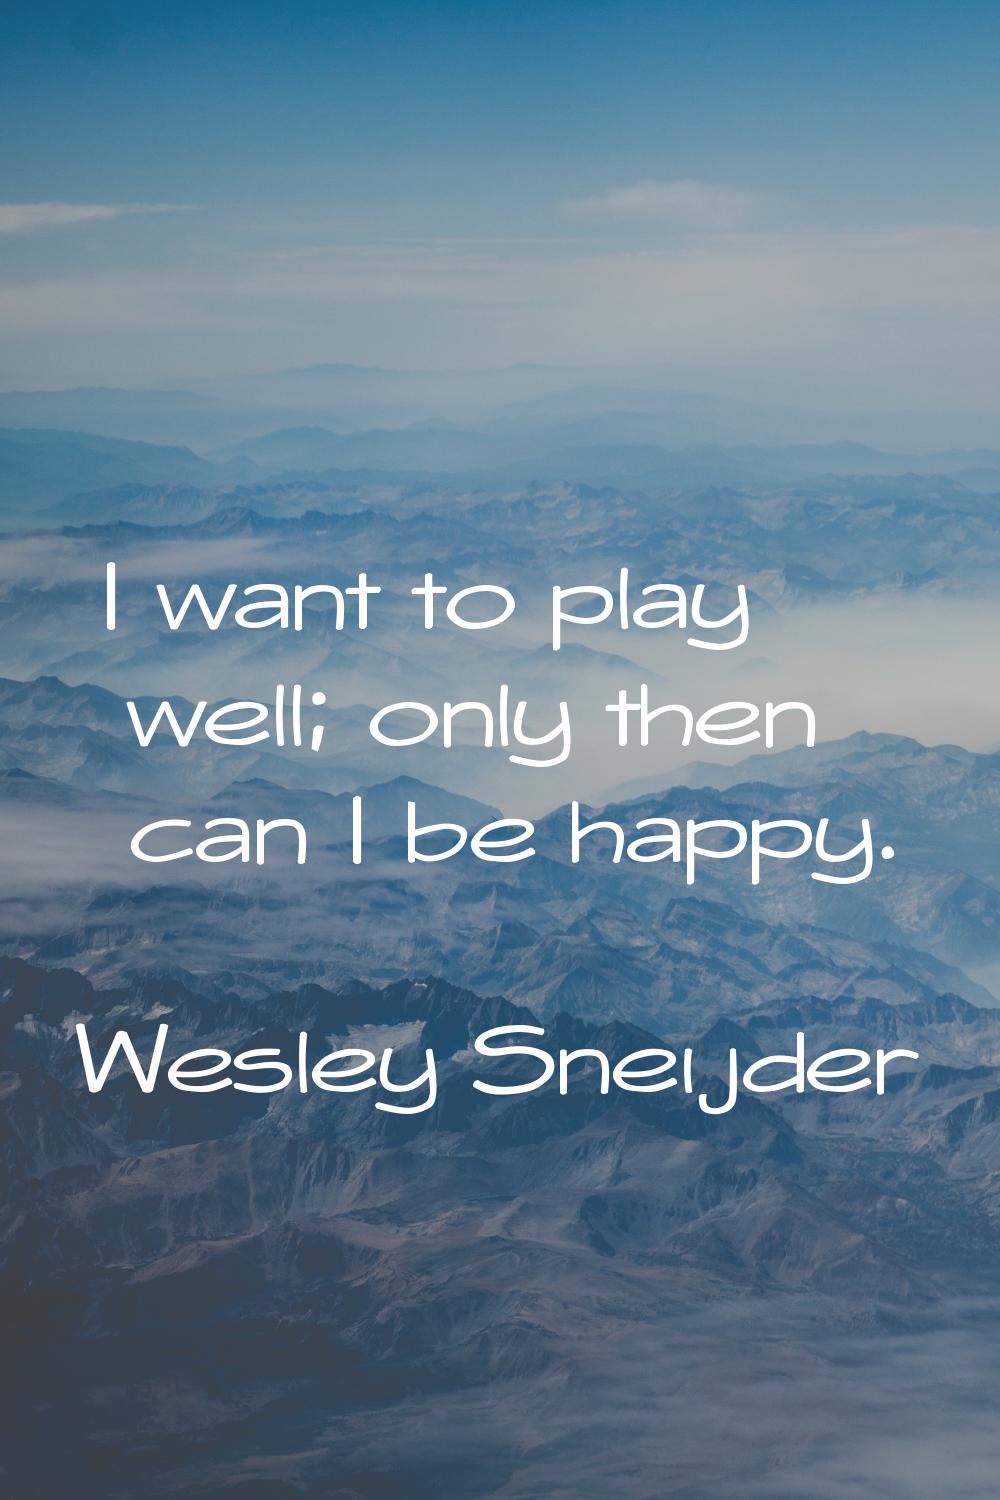 I want to play well; only then can I be happy.